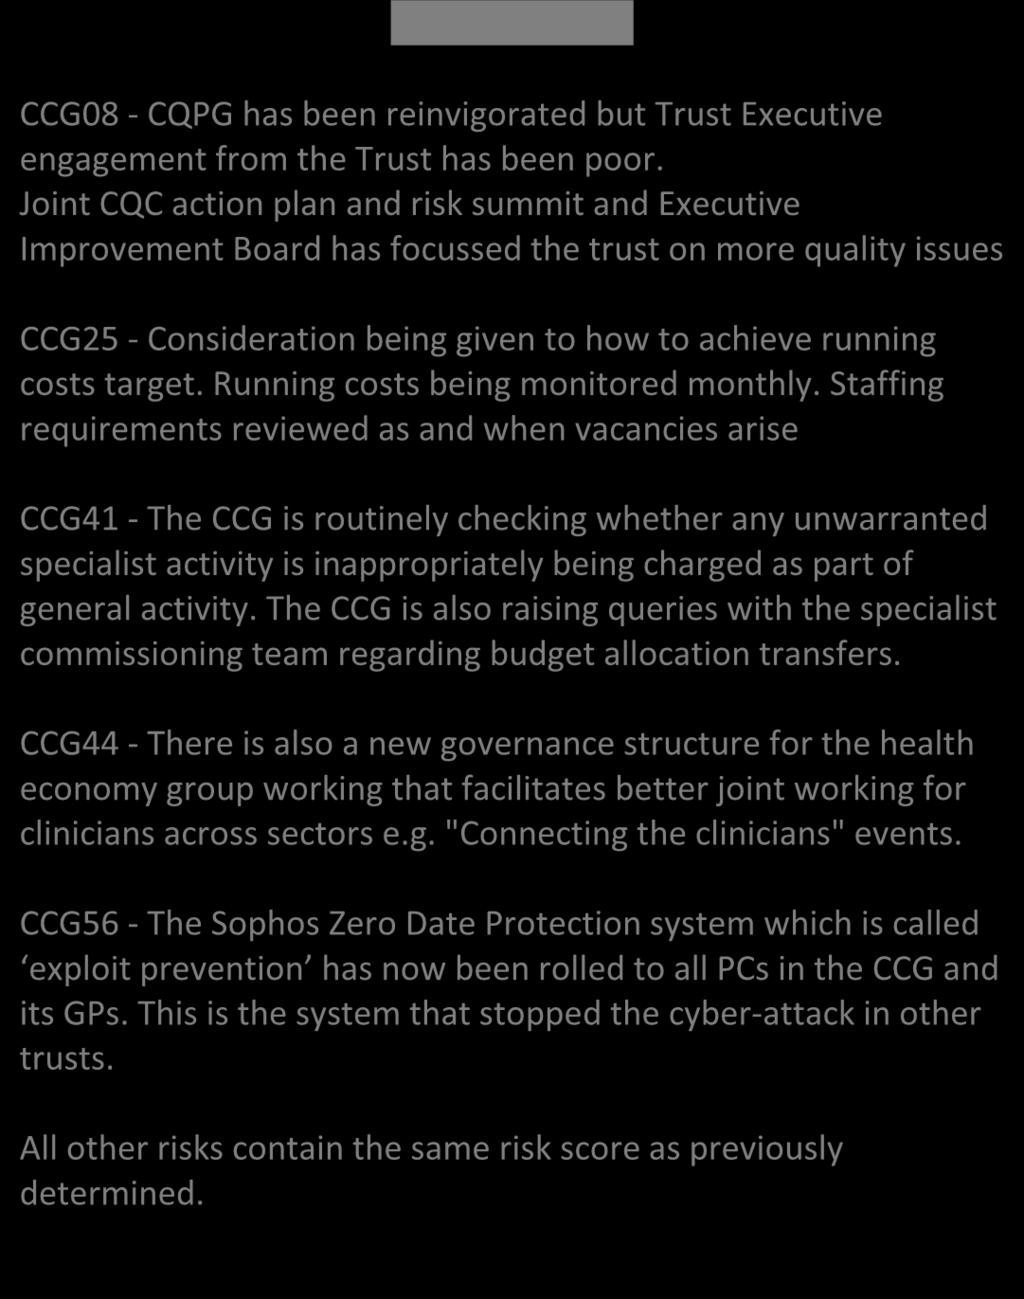 The CCG Risk Register has been reviewed to reflect the up to date position as at 17 November 2017.